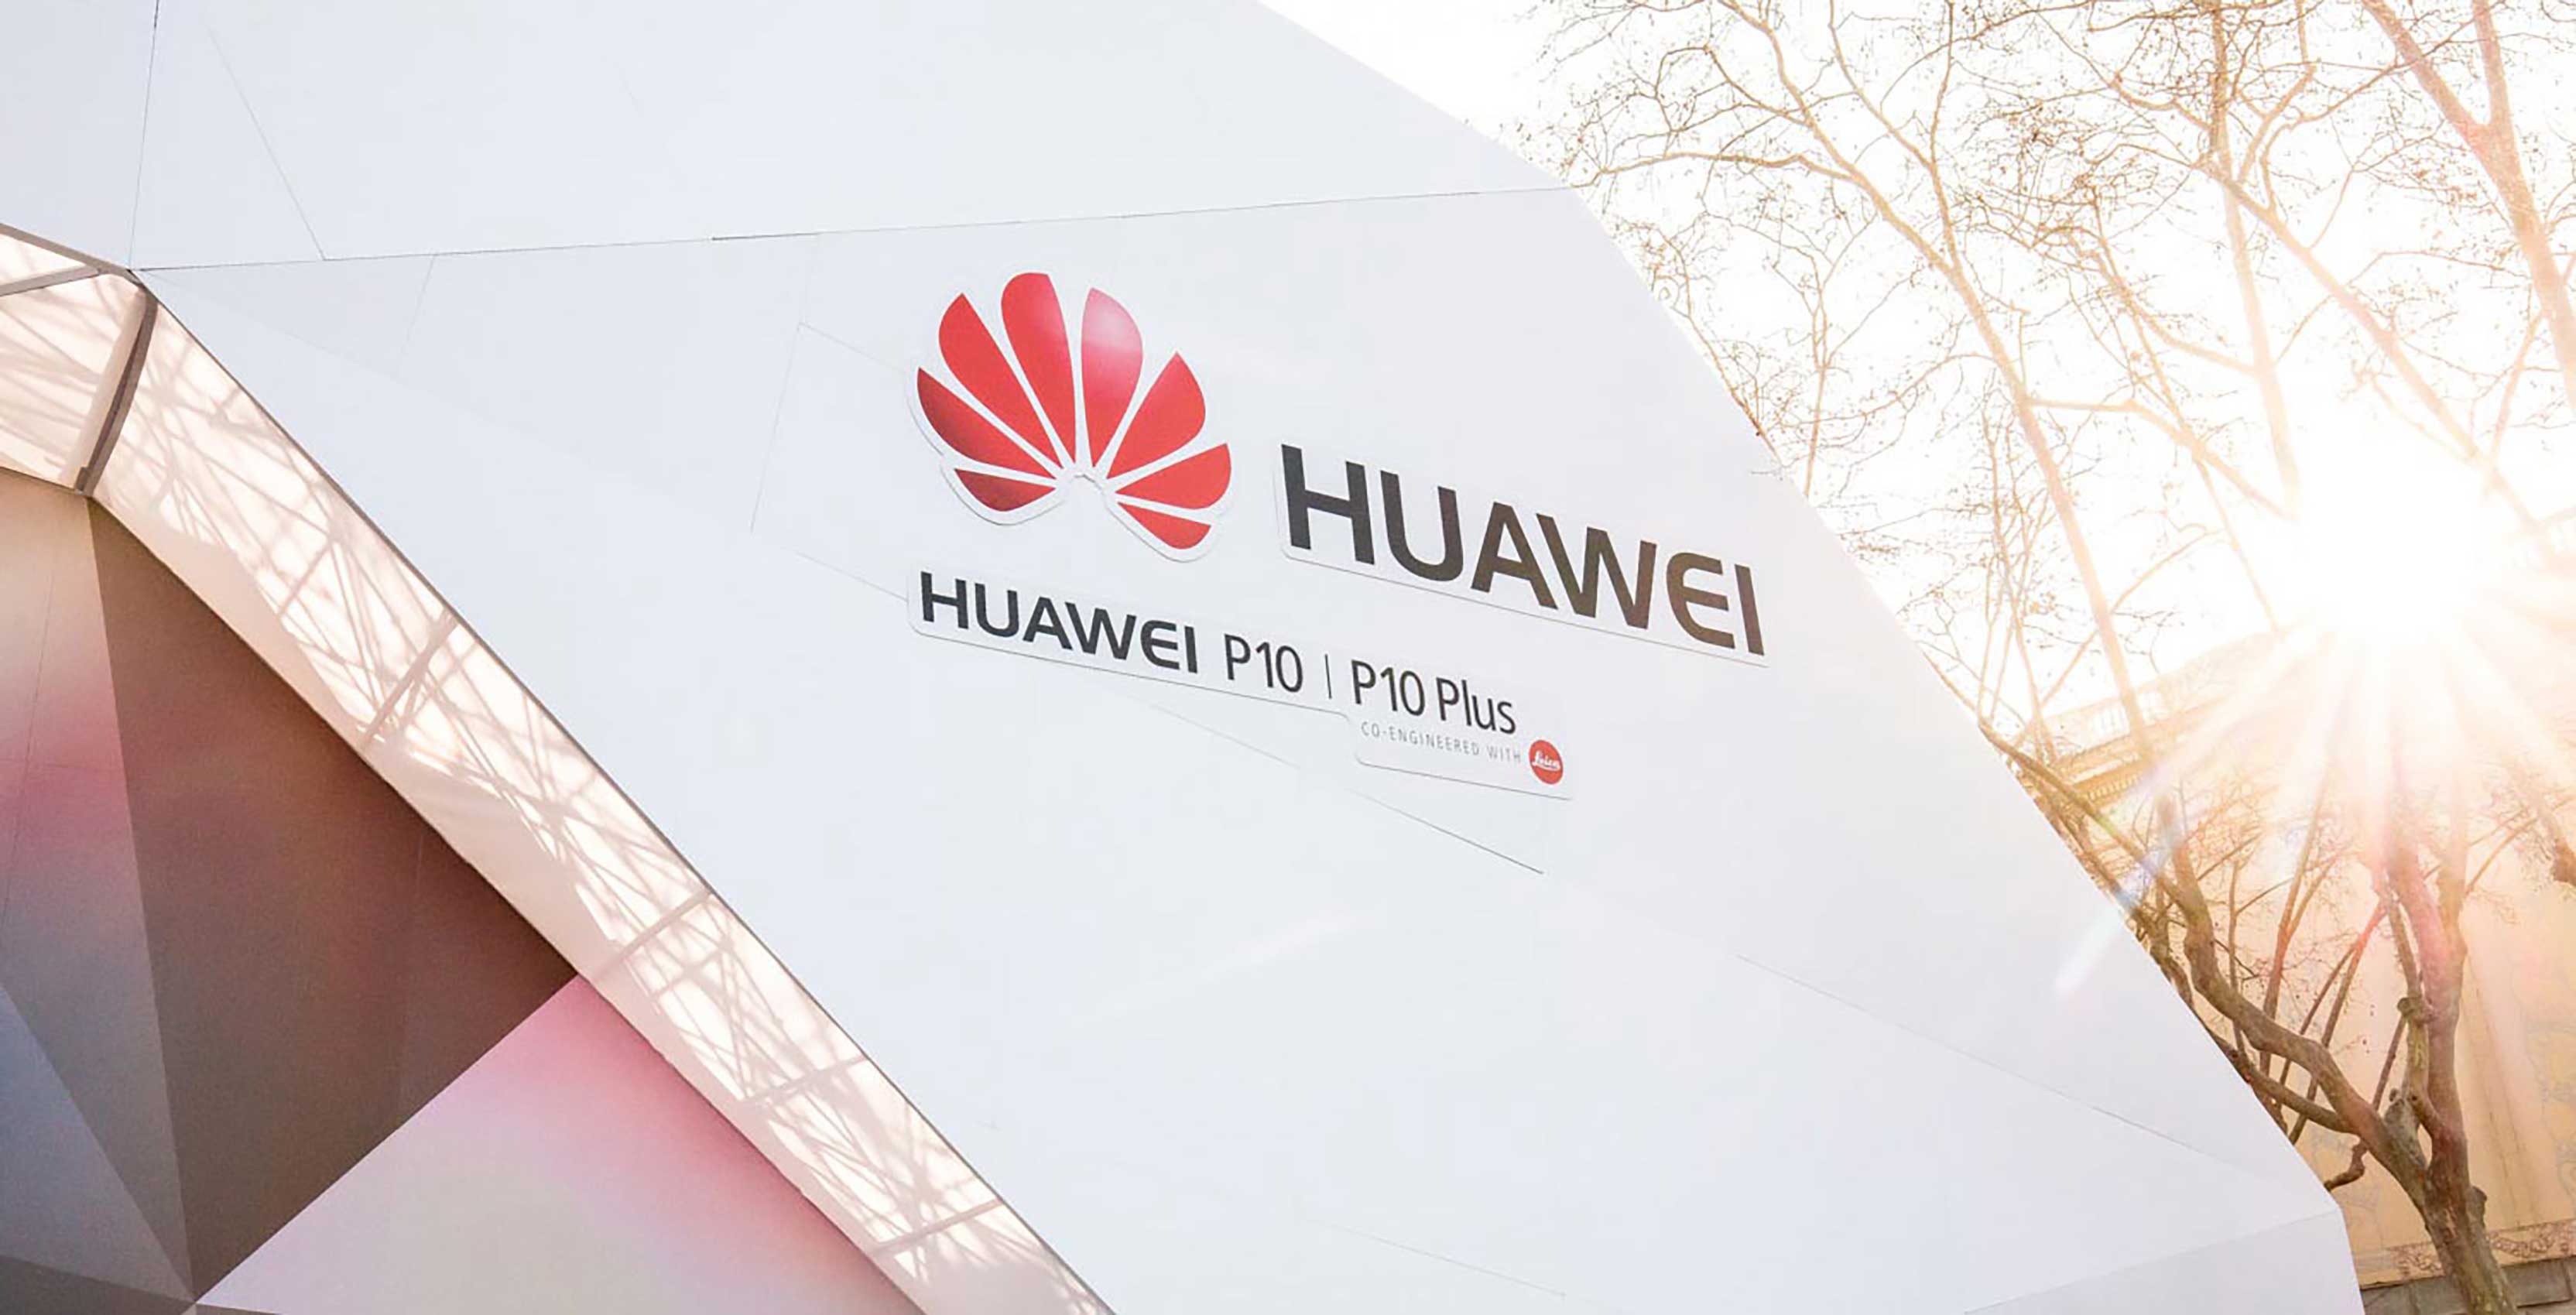 Huawei launch event banner